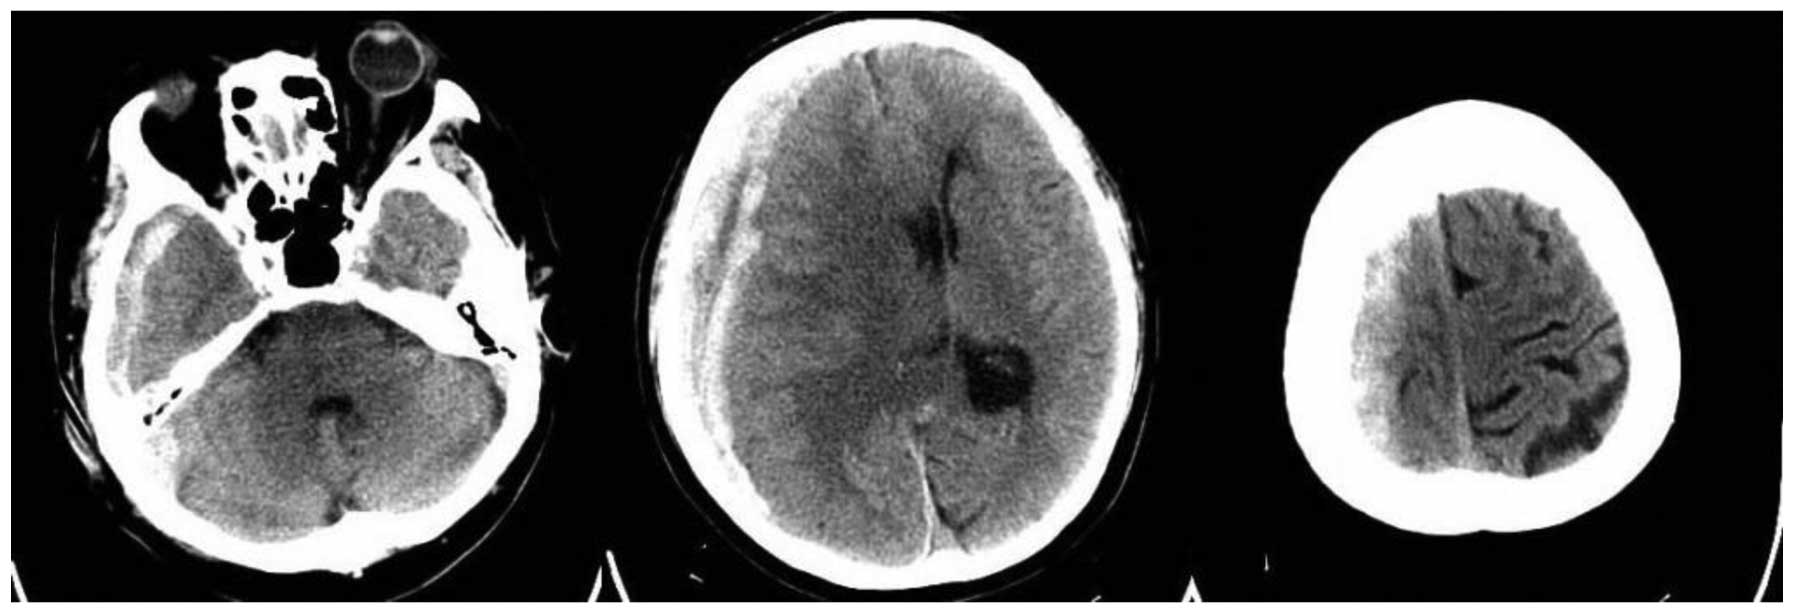 Acute on chronic subdural hematoma case report examples